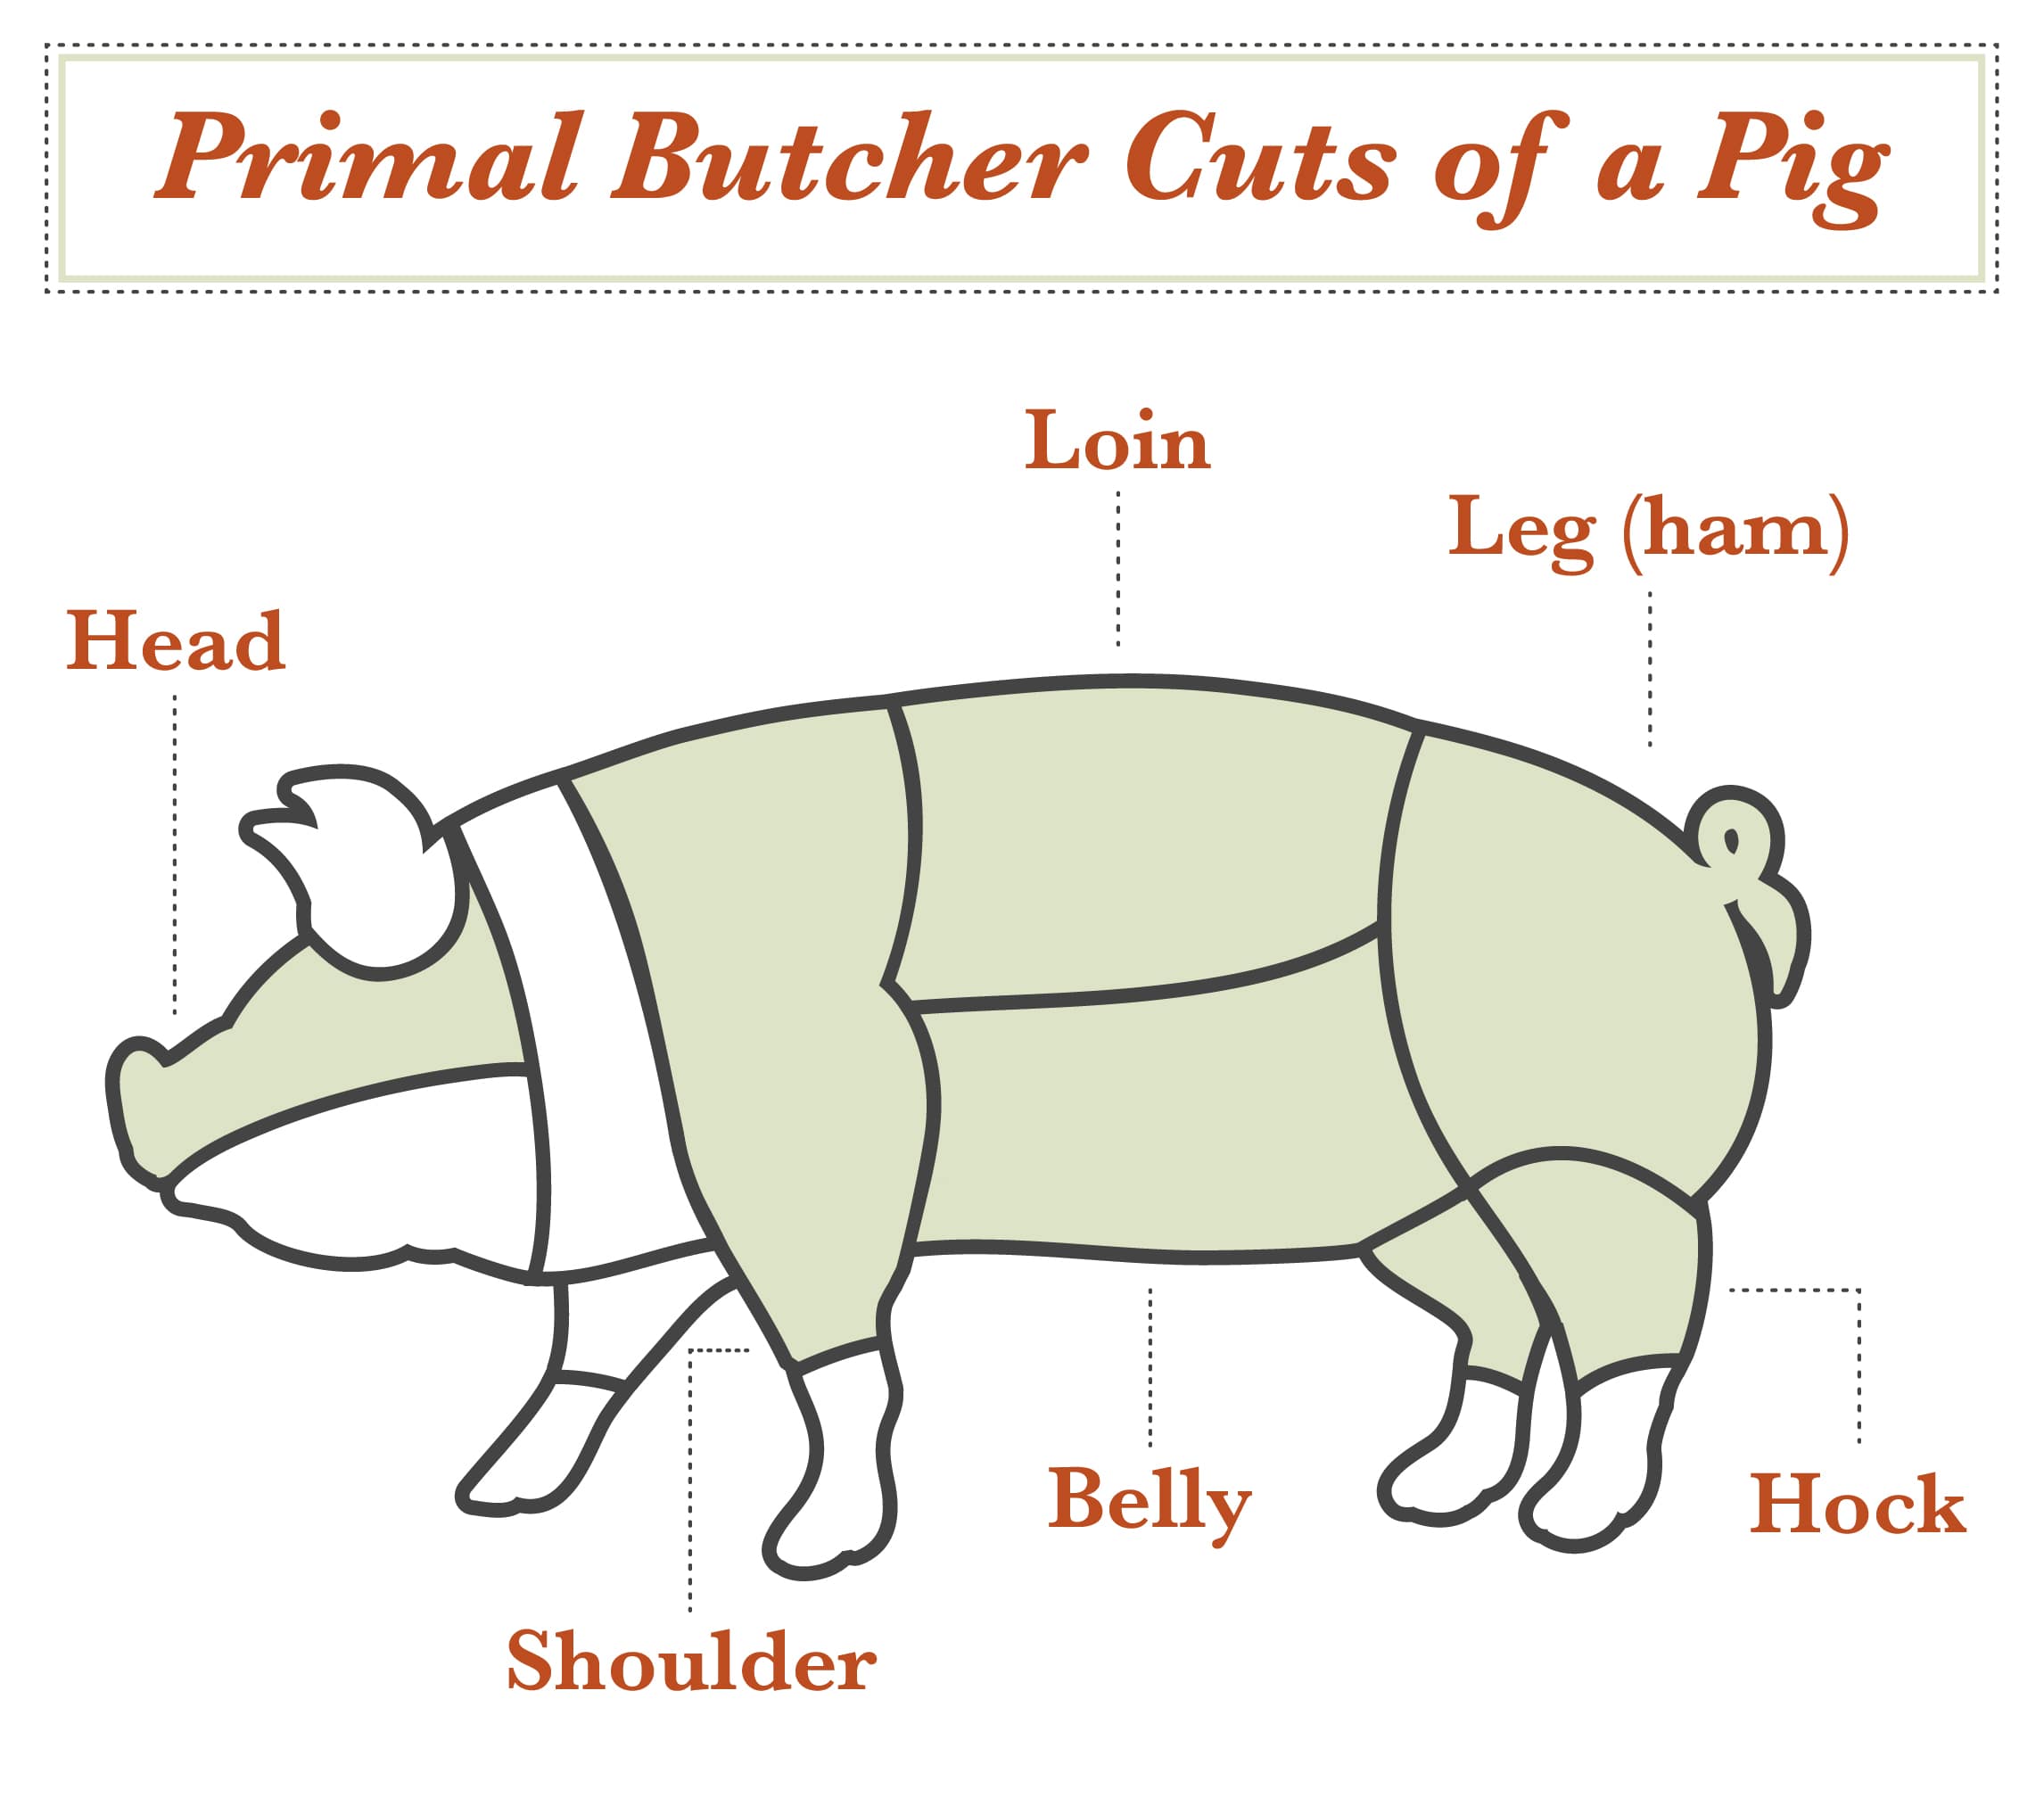 A pig butcher chart showing the primal cuts of pork.